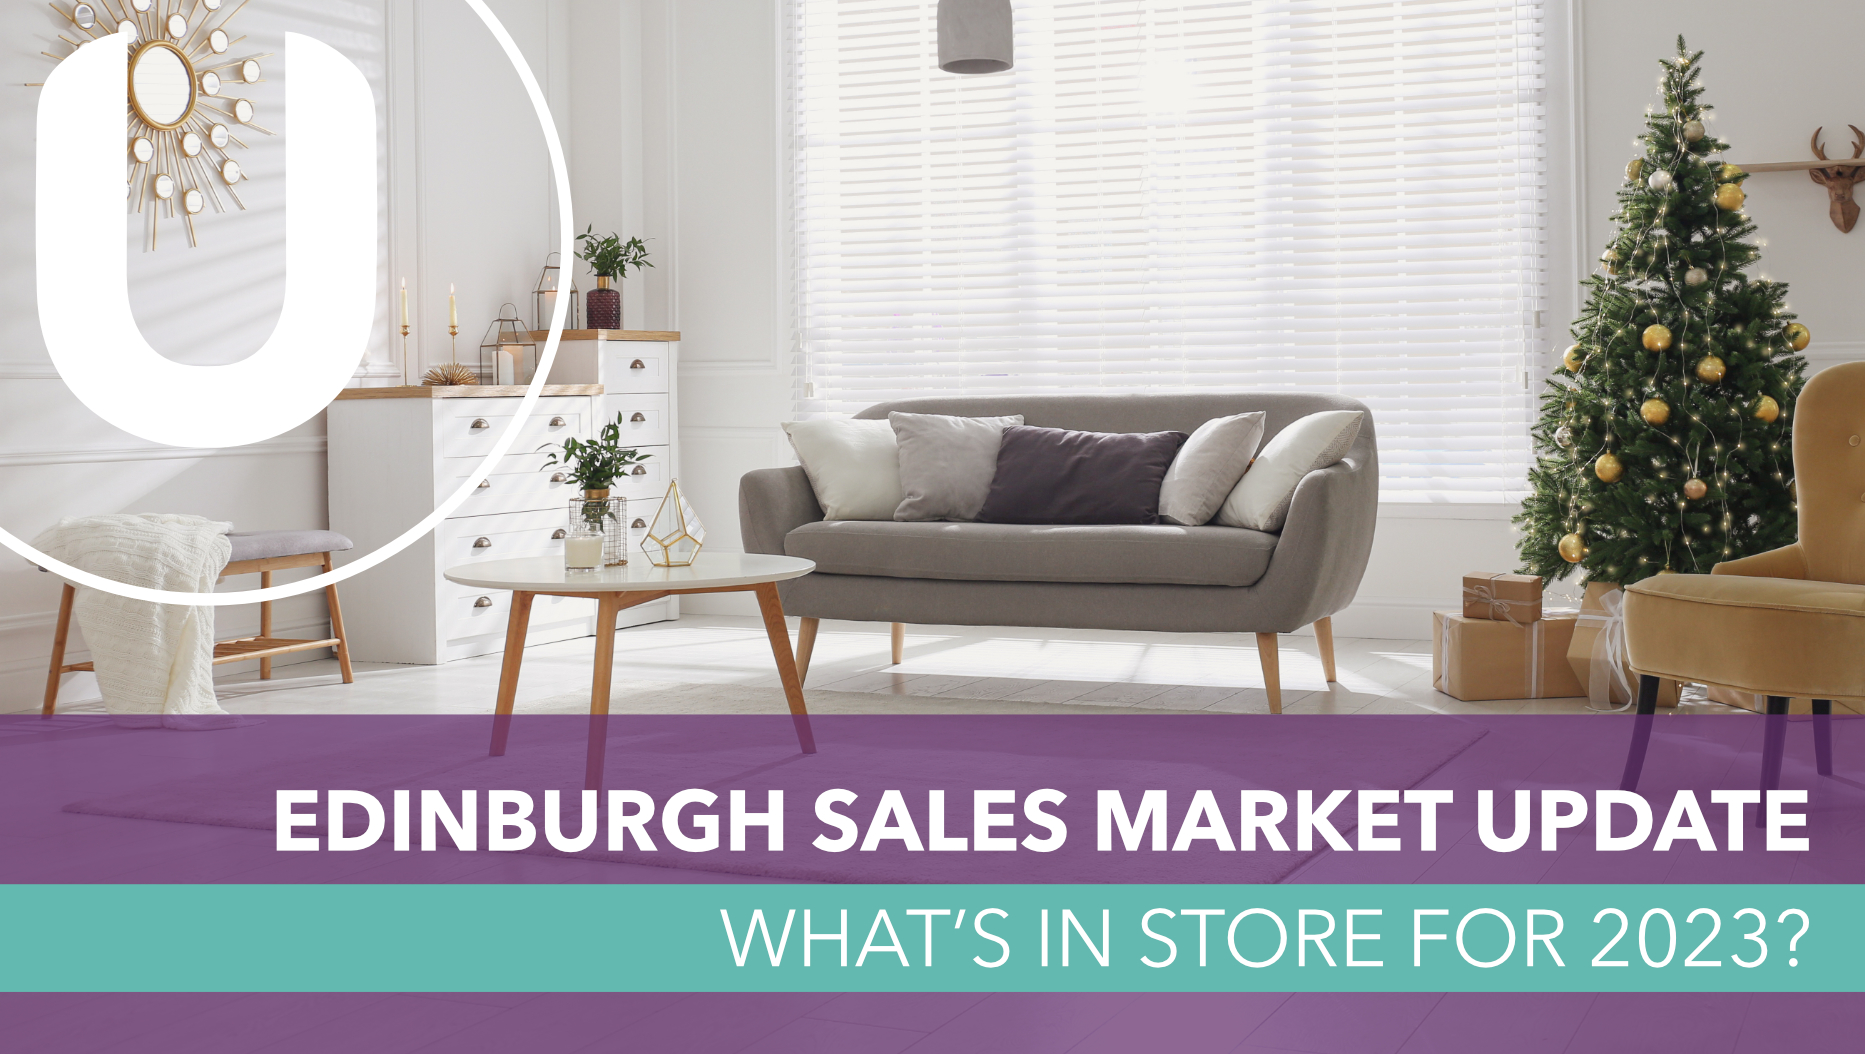 Edinburgh sales market update - What’s in store for 2023?